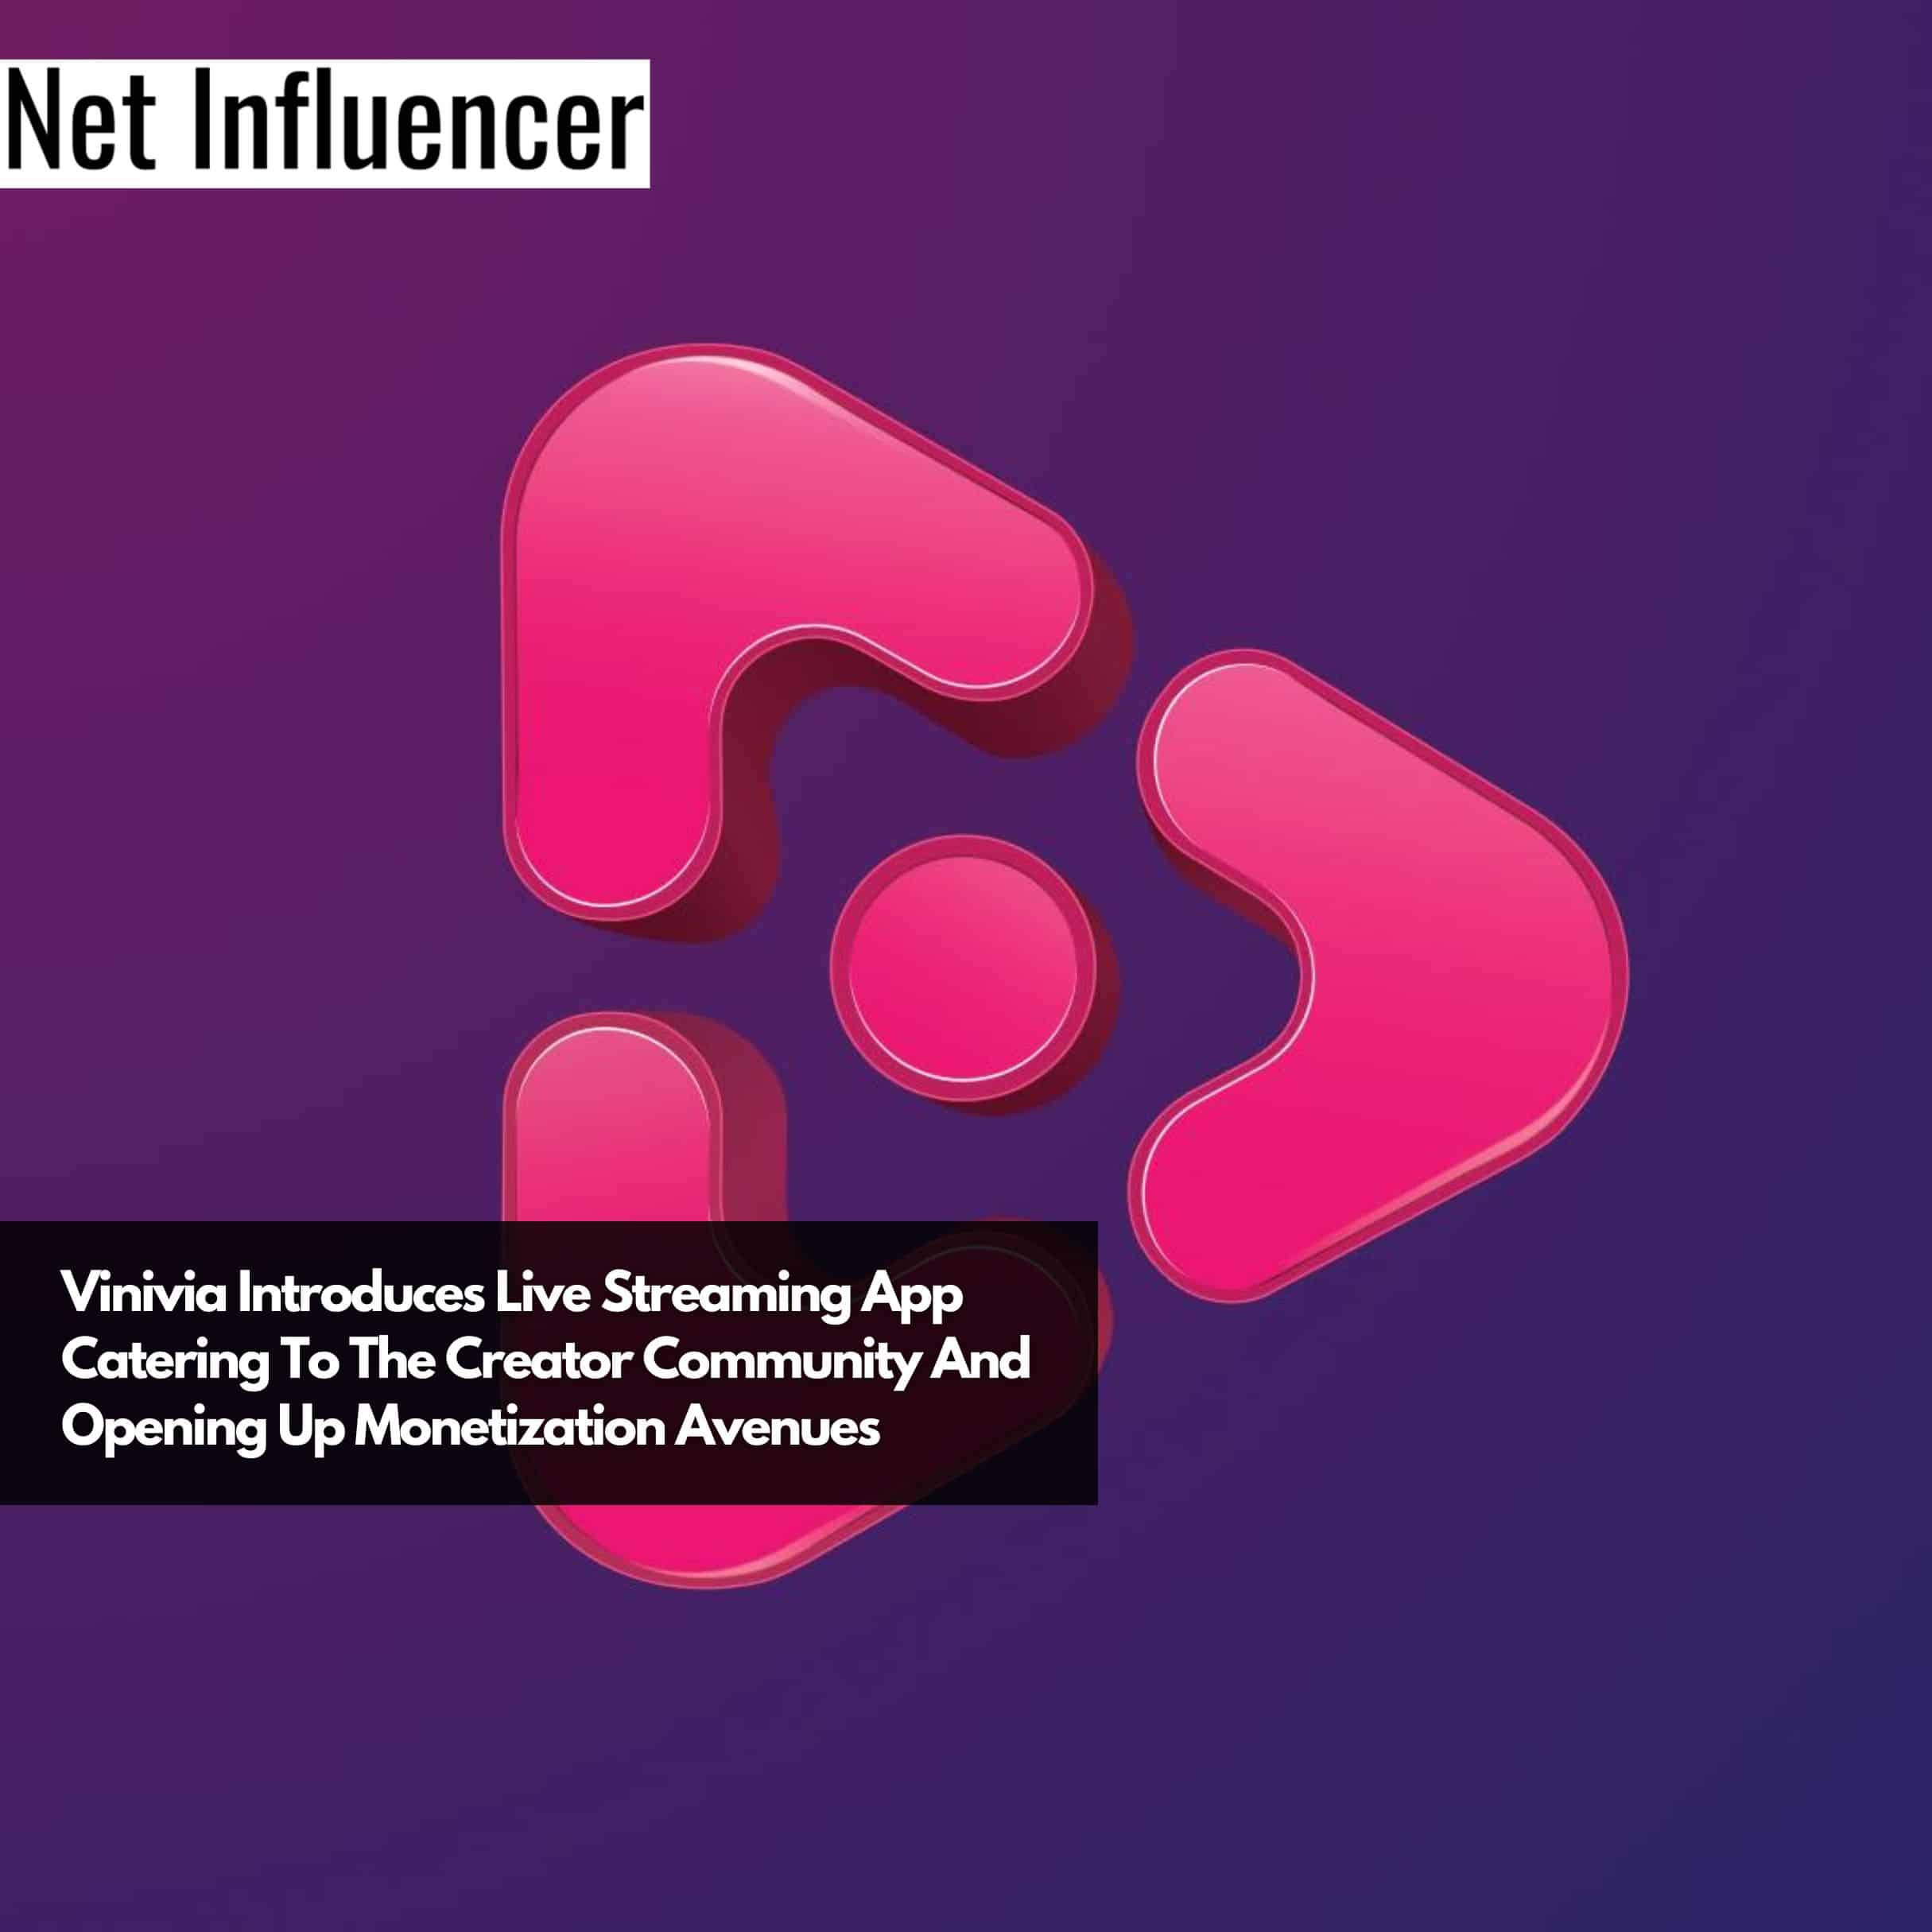 Vinivia Introduces Live Streaming App Catering To The Creator Community And Opening Up Monetization Avenues